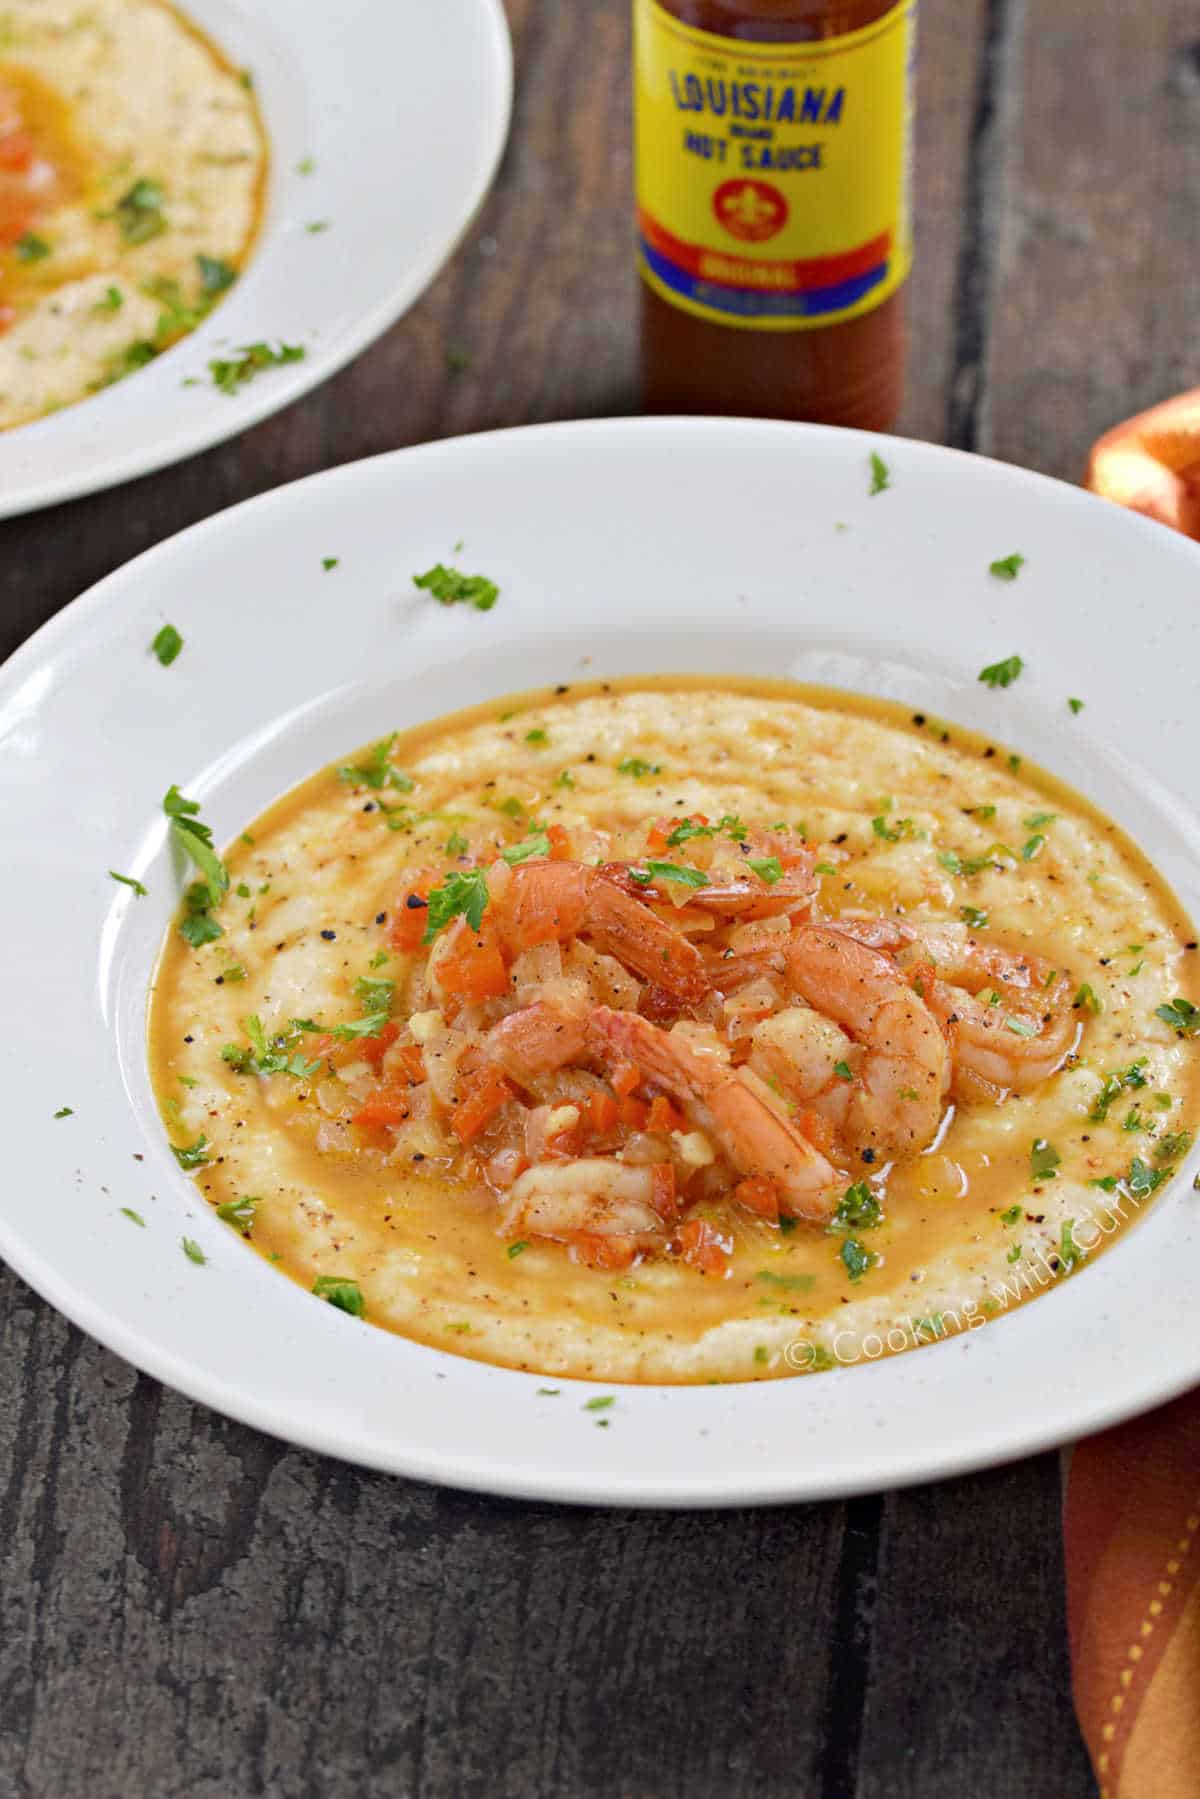 Two bowls of cheesy grits topped with seasoned shrimp and parsley with a bottle of hot sauce between them.